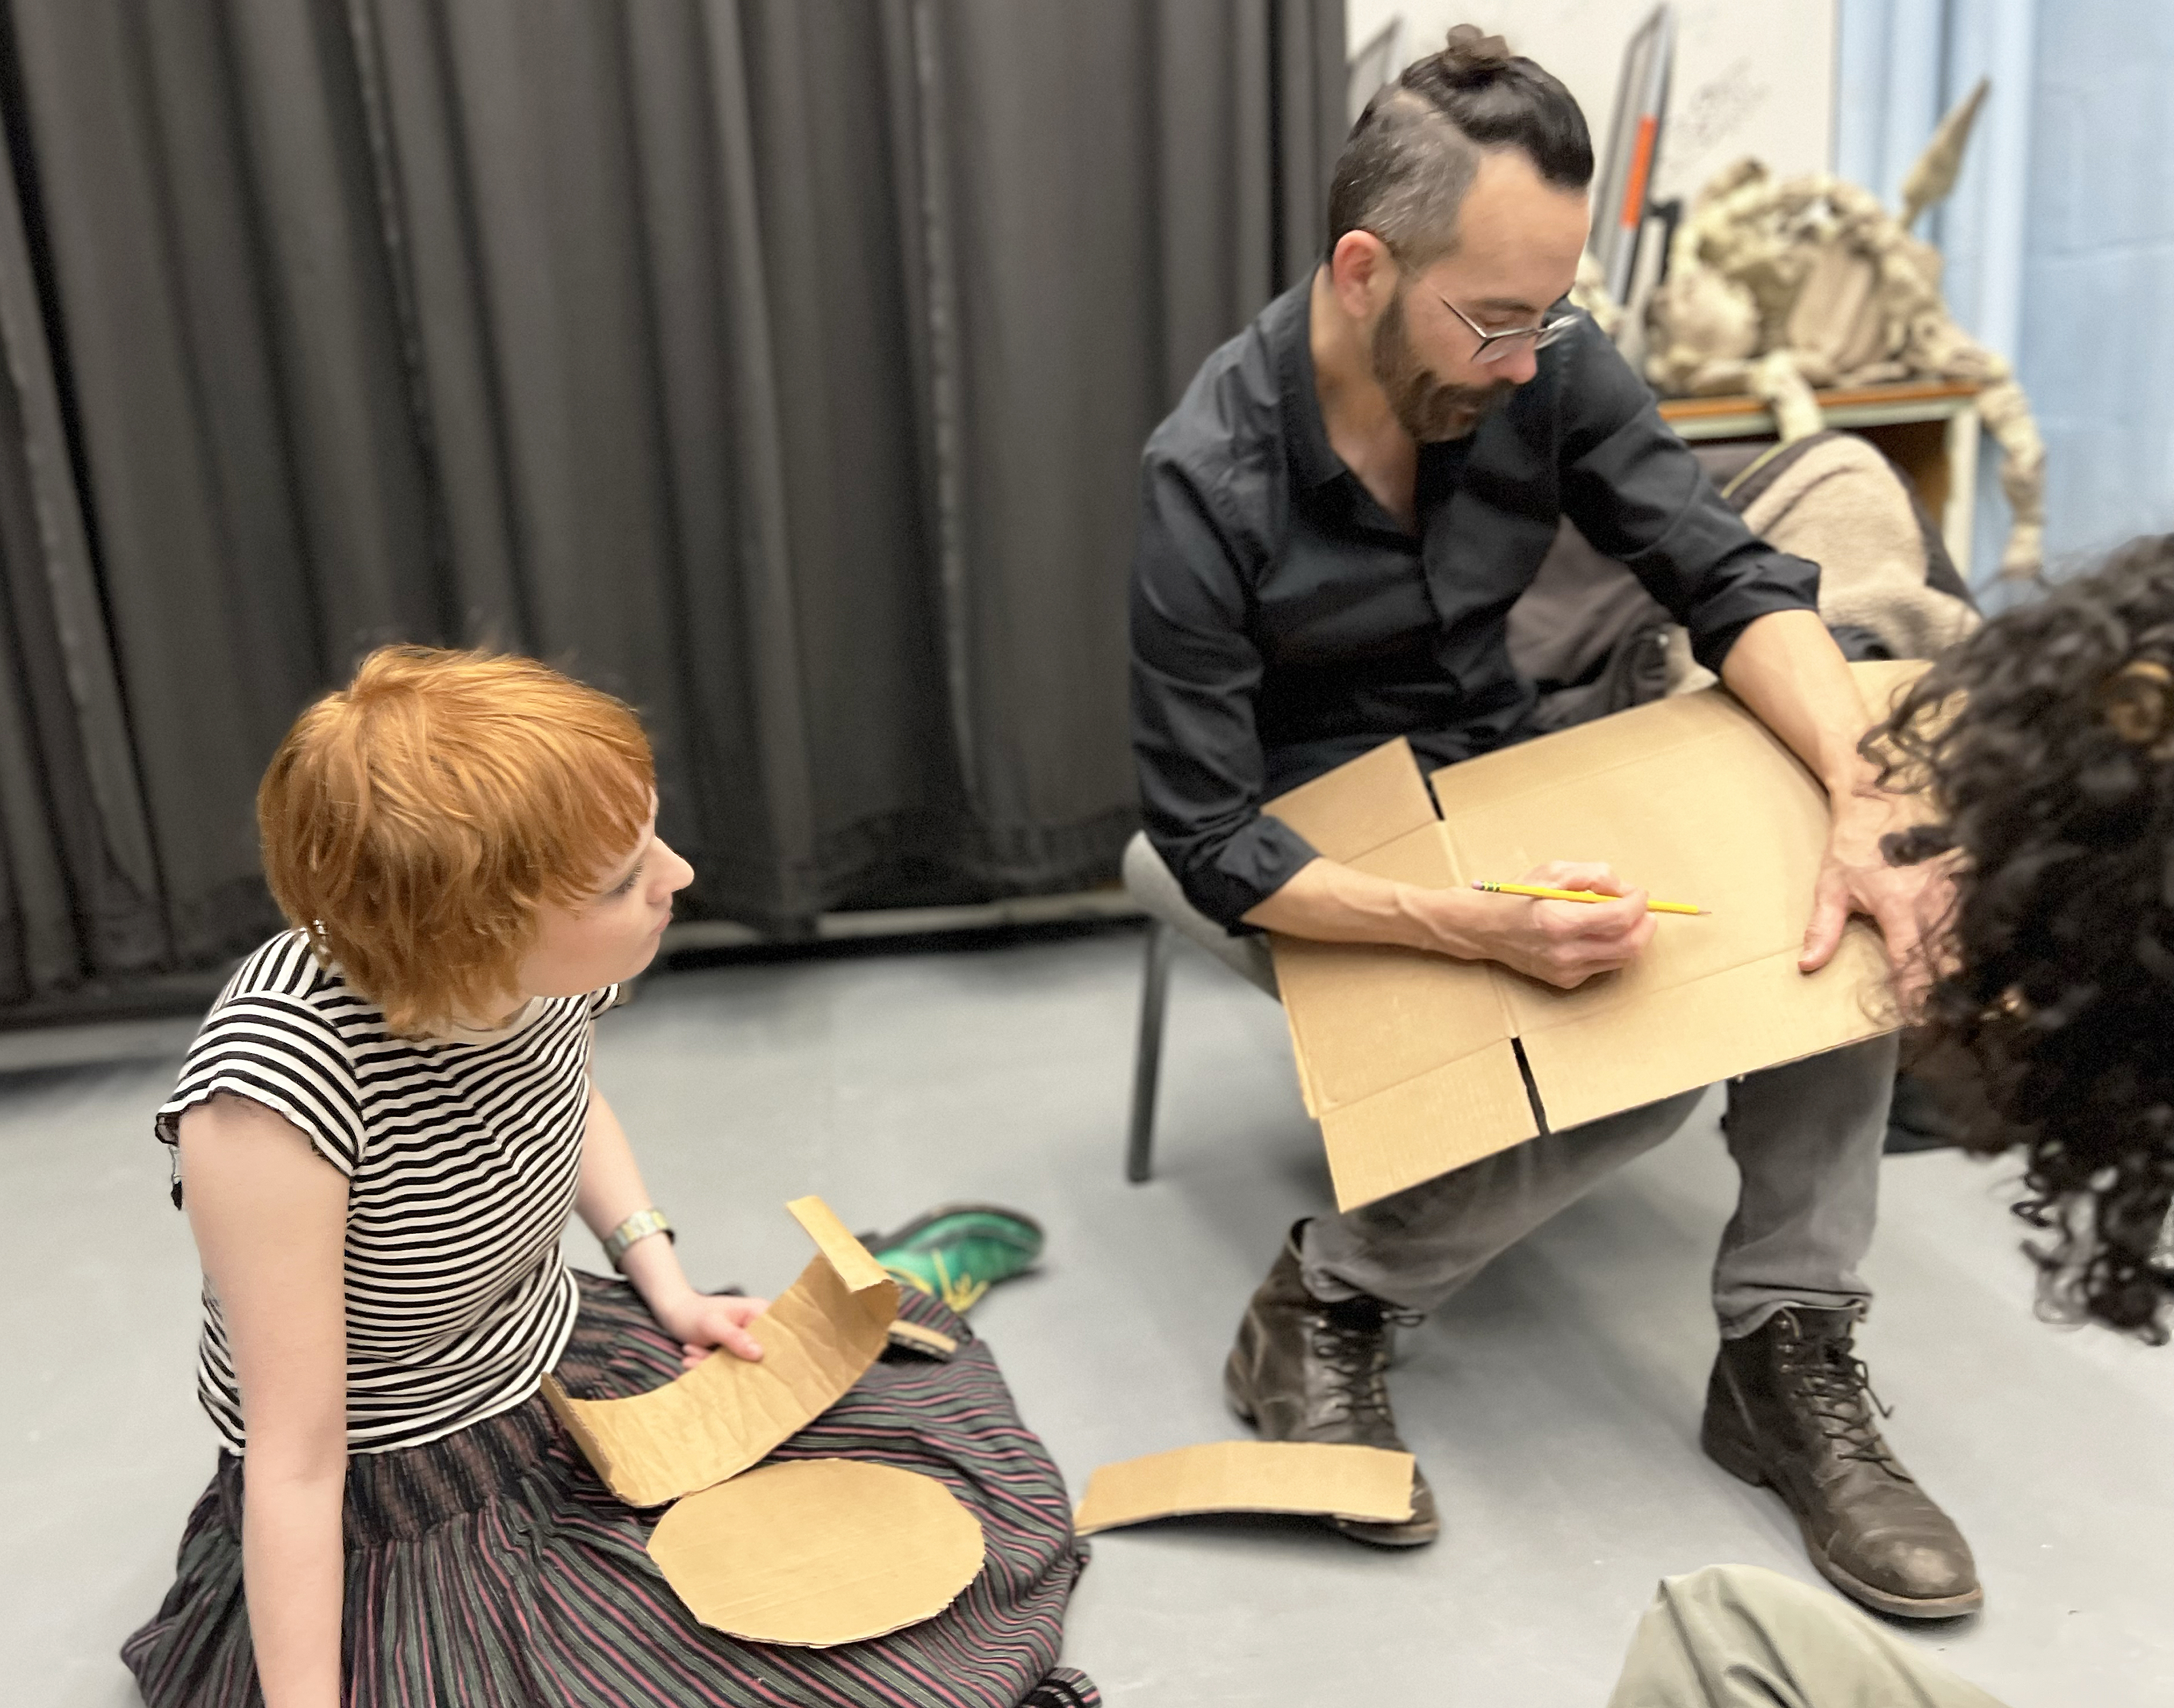 visiting puppeteer Tom Lee provides advice about using cardboard and papier-mache